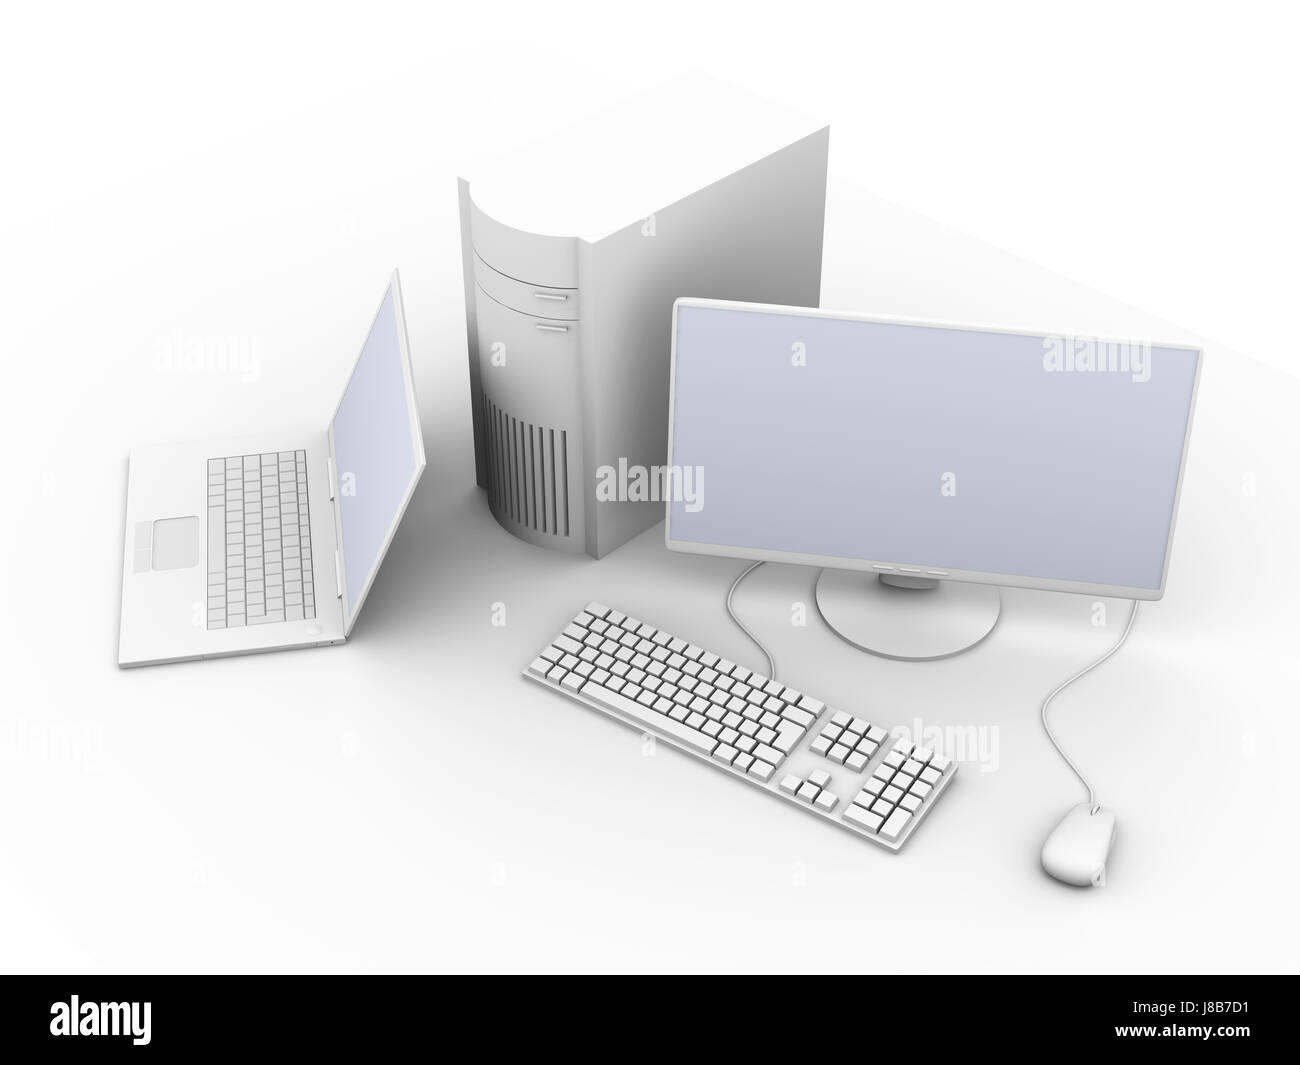 tower, office, laptop, notebook, computers, computer, keyboard, PC, isolated, Stock Photo